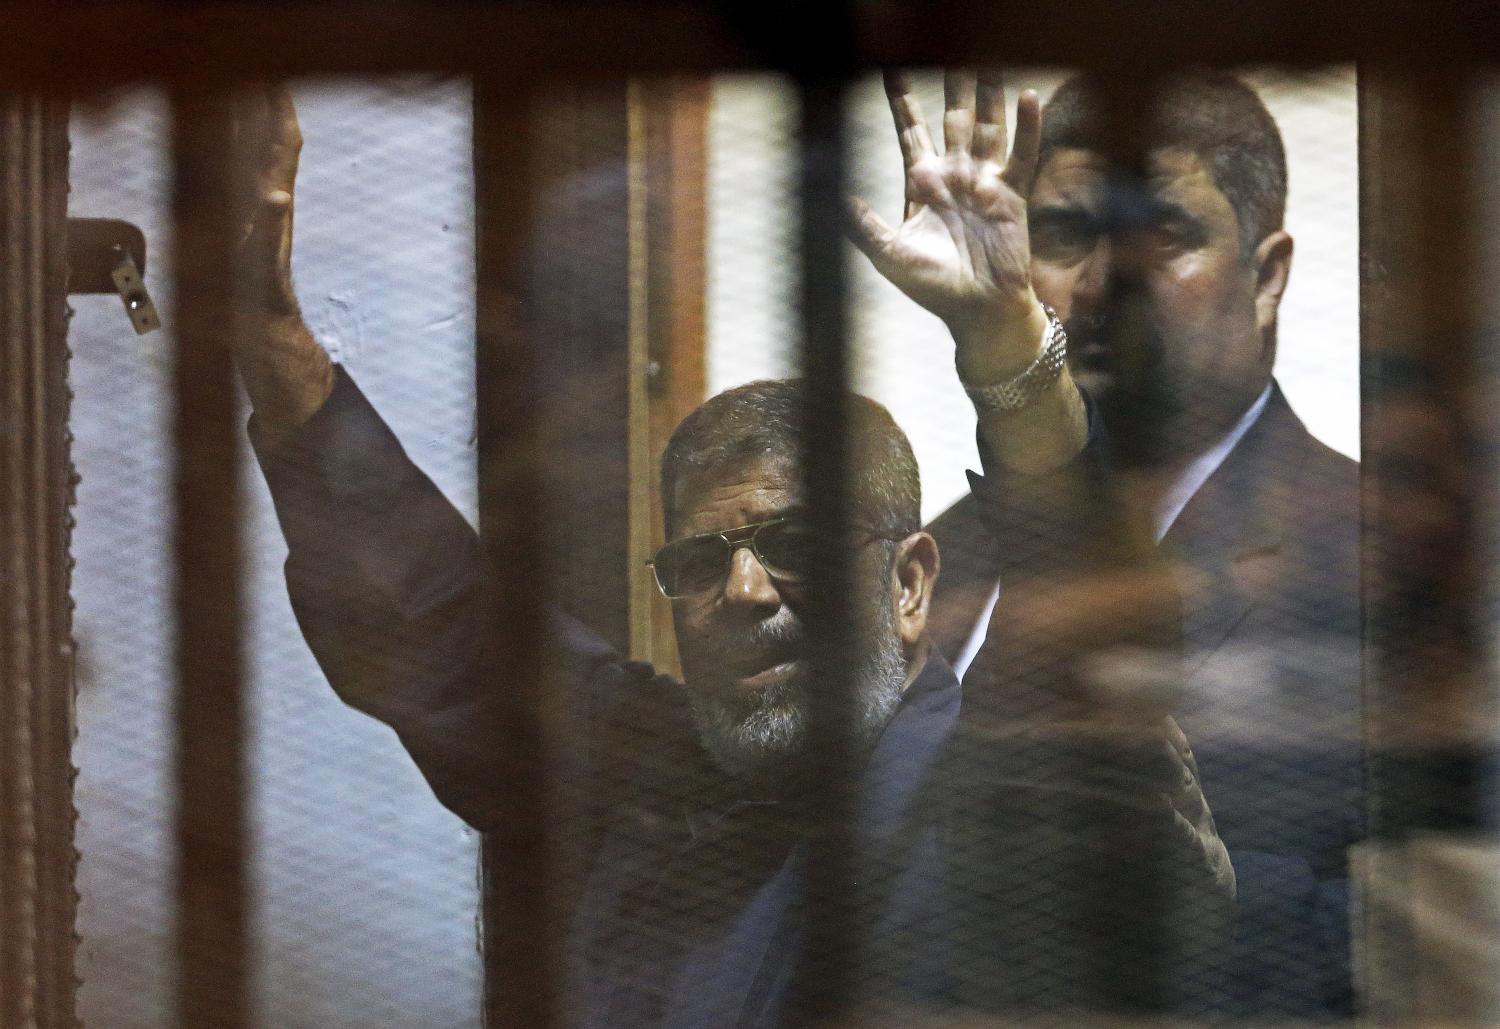 Deposed Egyptian President Mohamed Mursi greets his lawyers and people from behind bars after his verdict at a court on the outskirts of Cairo, Egypt June 16, 2015. An Egyptian court sentenced deposed President Mohamed Mursi to death on Tuesday on charges of killing, kidnapping and other offences during a 2011 mass jail break.The general guide of the Muslim Brotherhood, Mohamed Badie, and four other Brotherhood leaders were also handed the death penalty. More than 80 others were sentenced to death in absentia. REUTERS/Asmaa Waguih      TPX IMAGES OF THE DAY      - GF10000129302